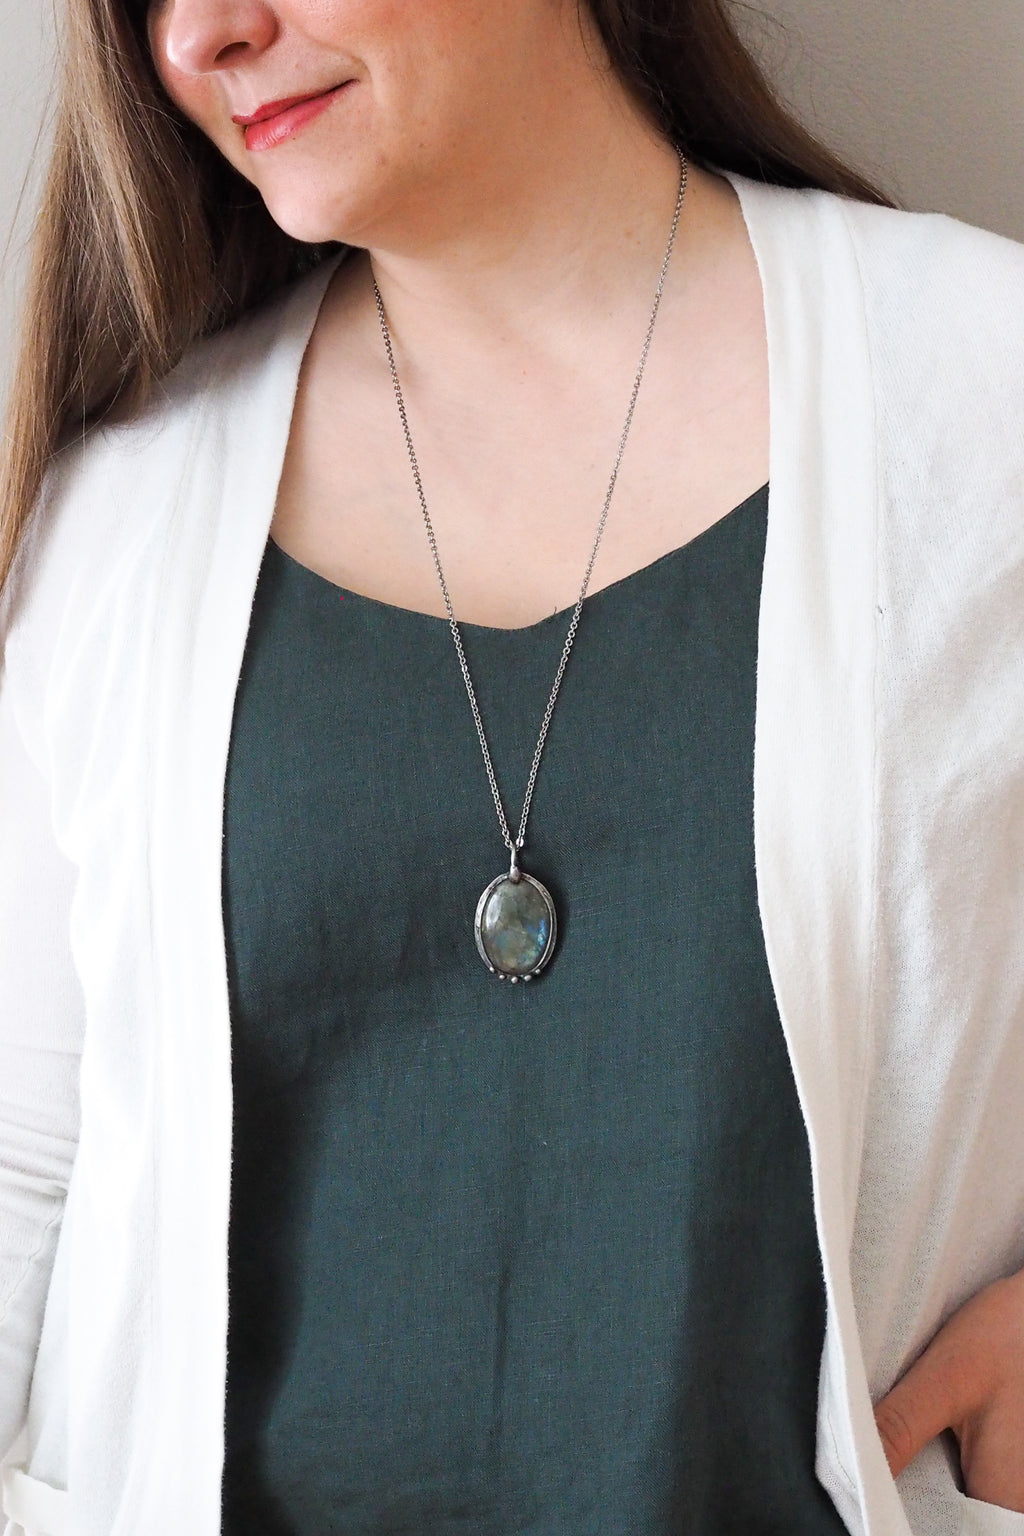 blue and green flashy labradorite gemstone healing crystal talisman statement necklace on woman in blue top with white cardigan